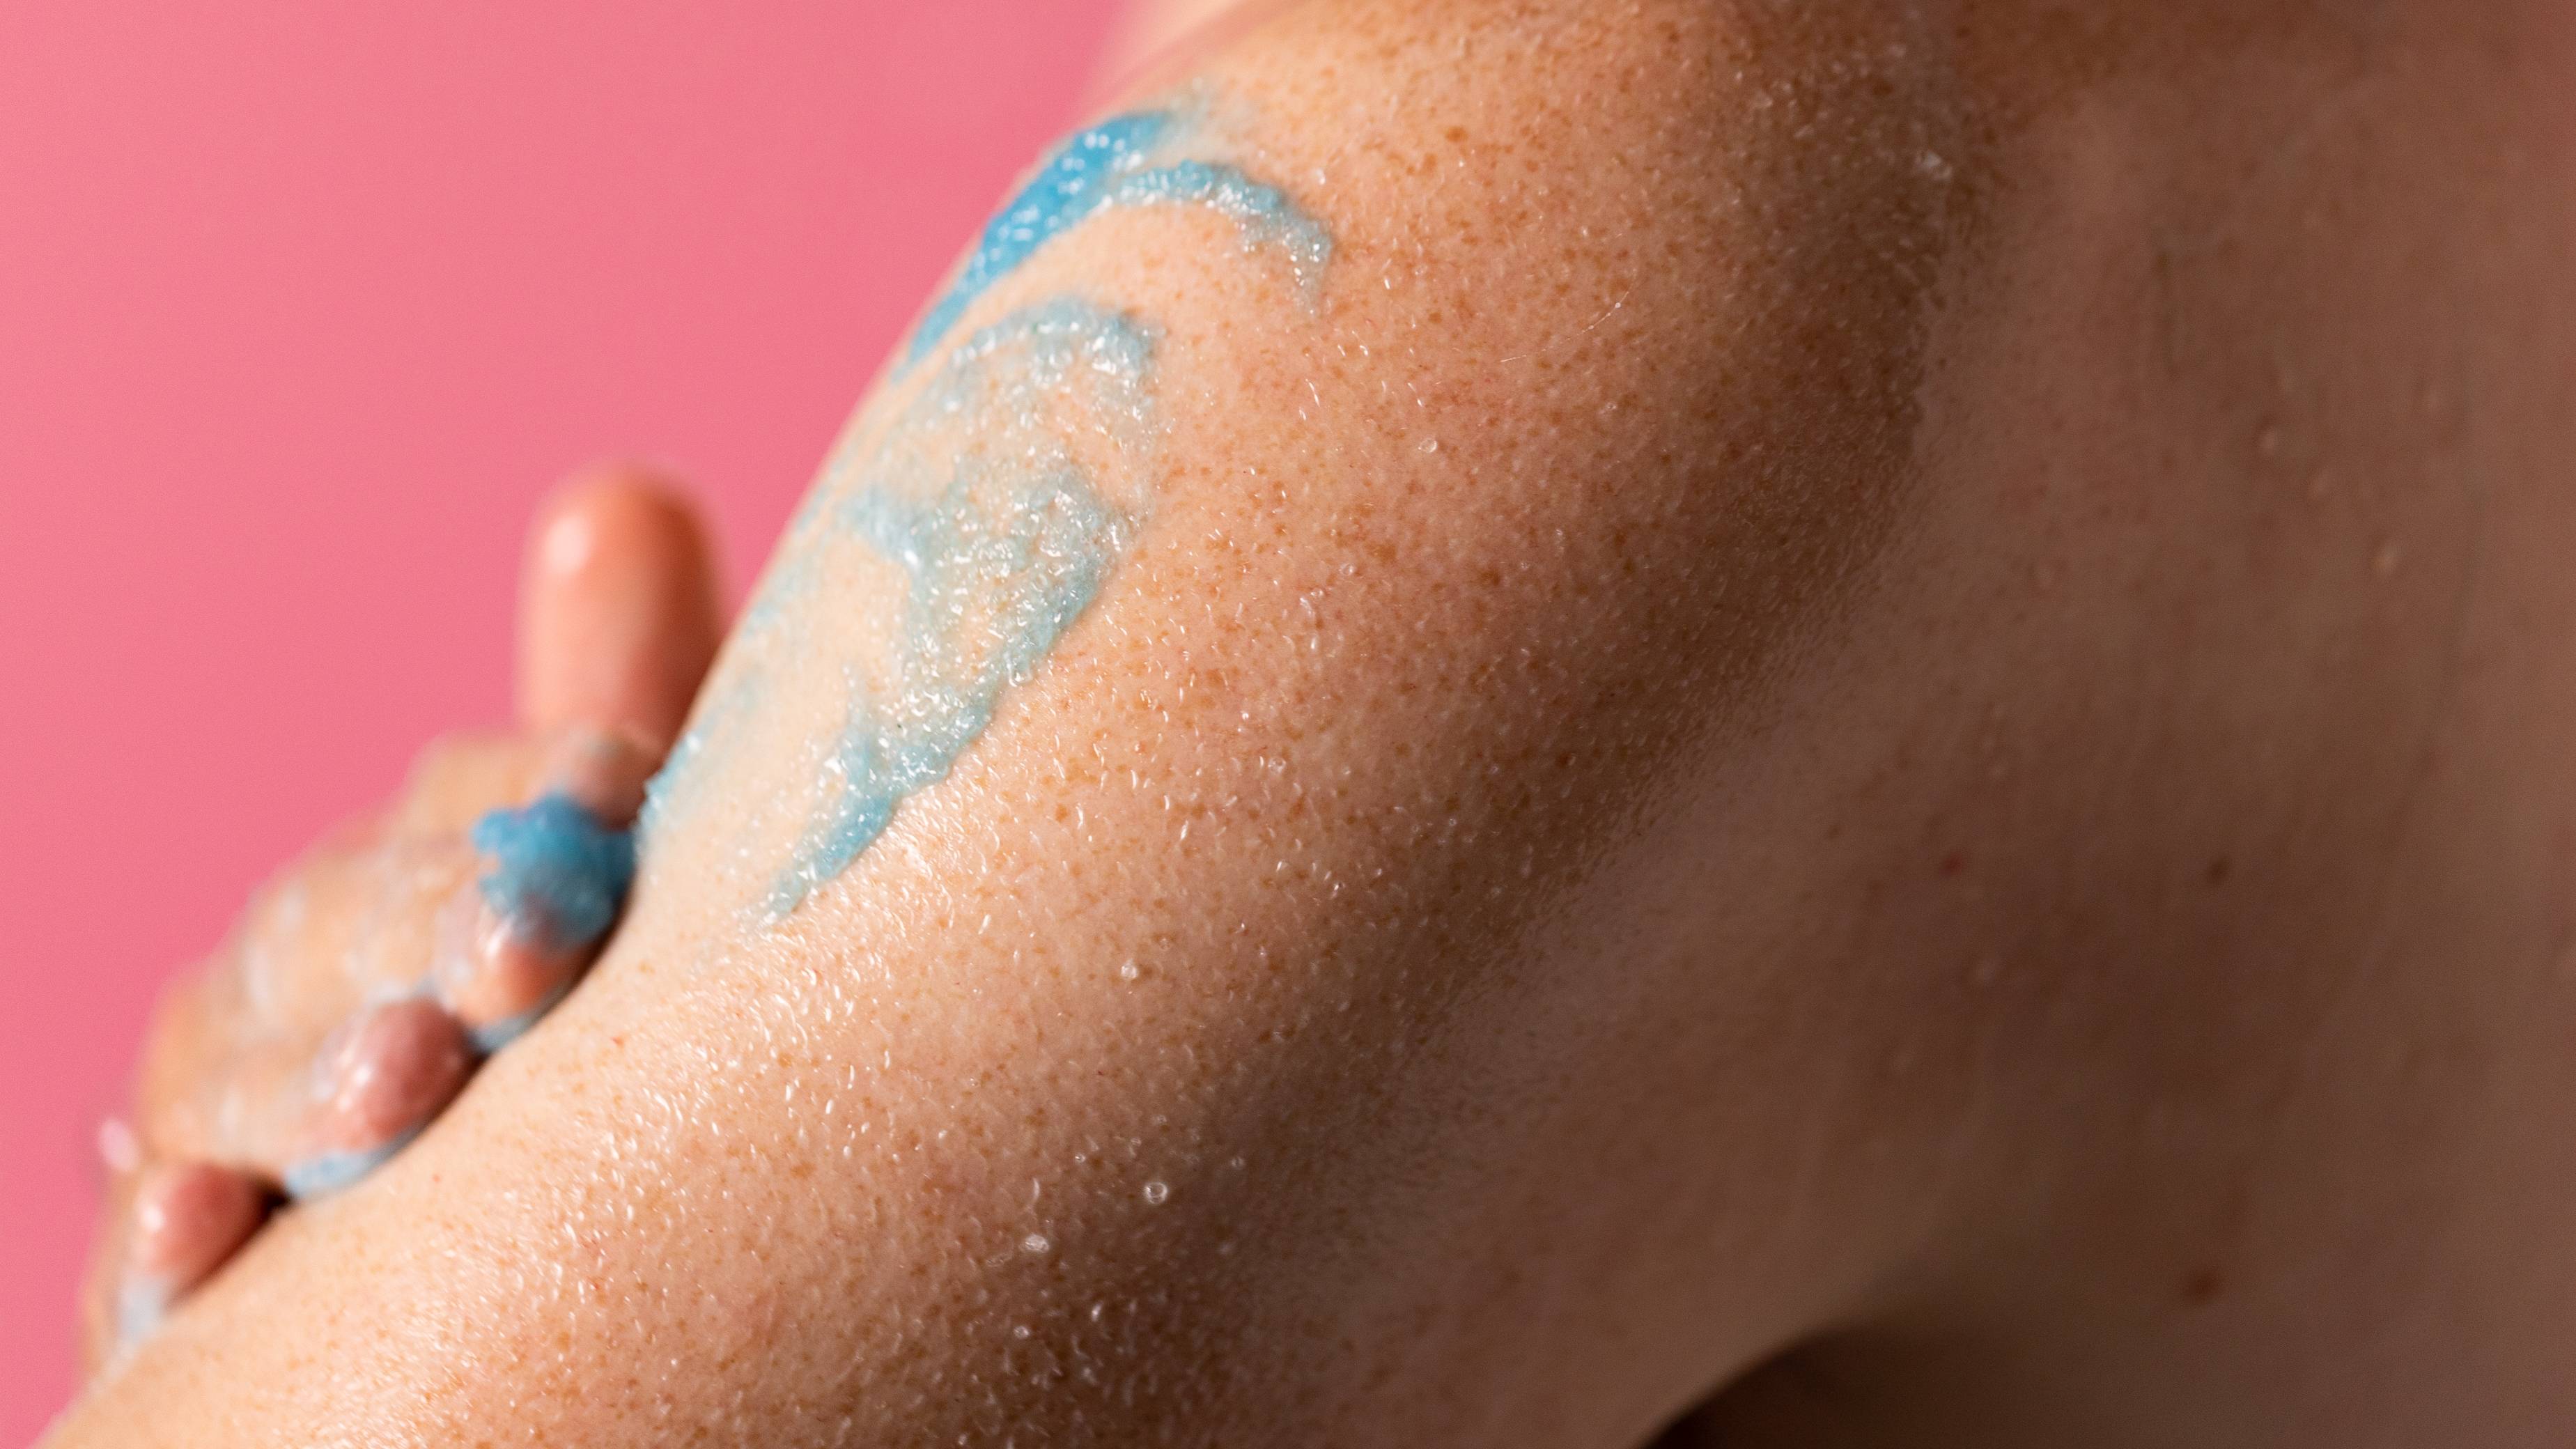 A light blue body scrub, thick with sea salt, is rubbed onto the shoulder by hand.